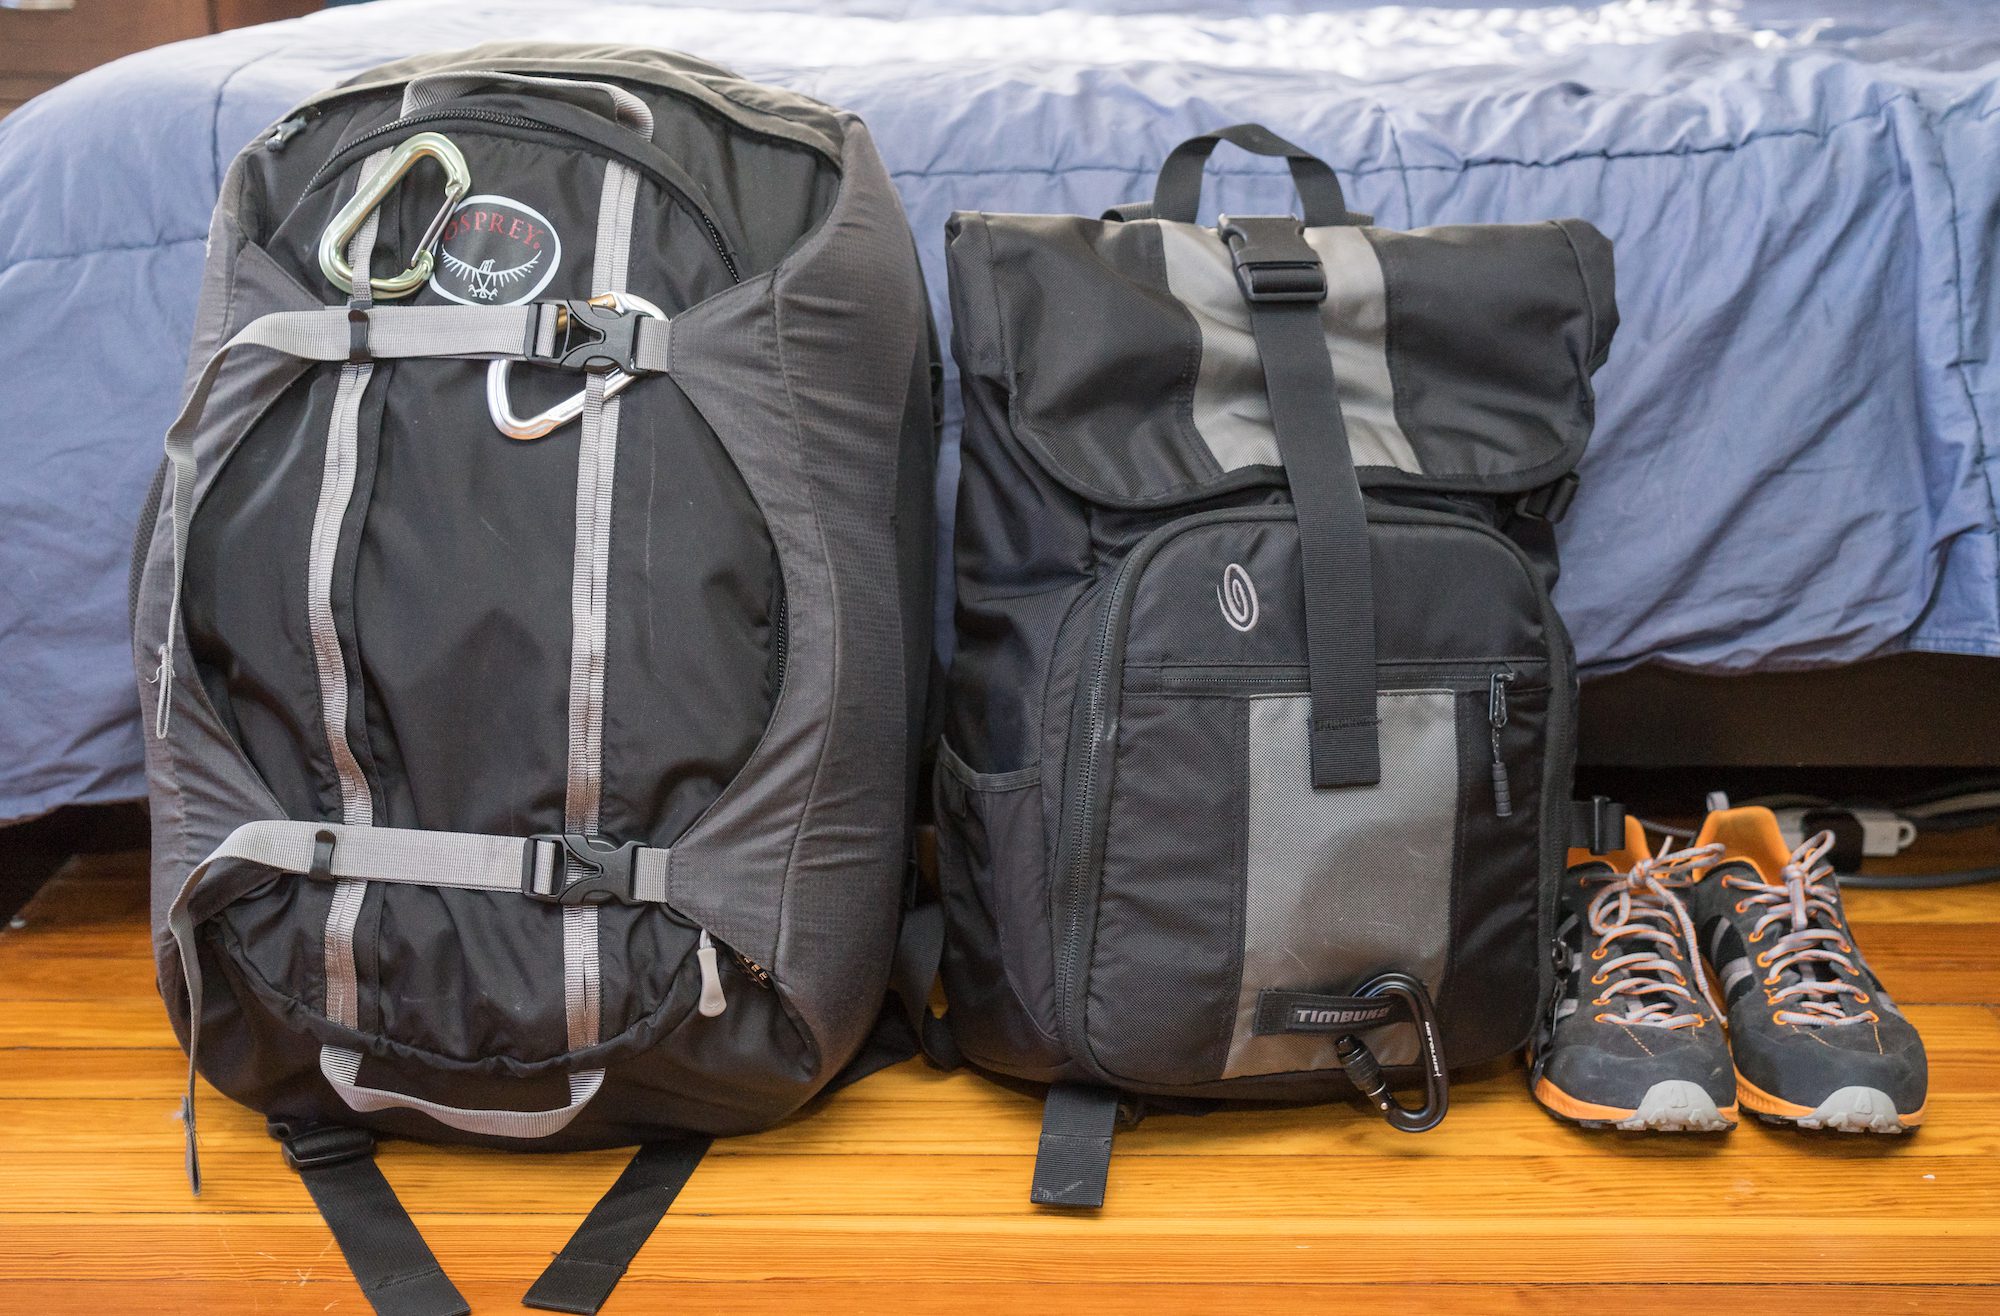 A large grey backpack with external straps and a smaller black bag are placed on a wooden floor, next to a pair of grey-orange sneakers, indoors.